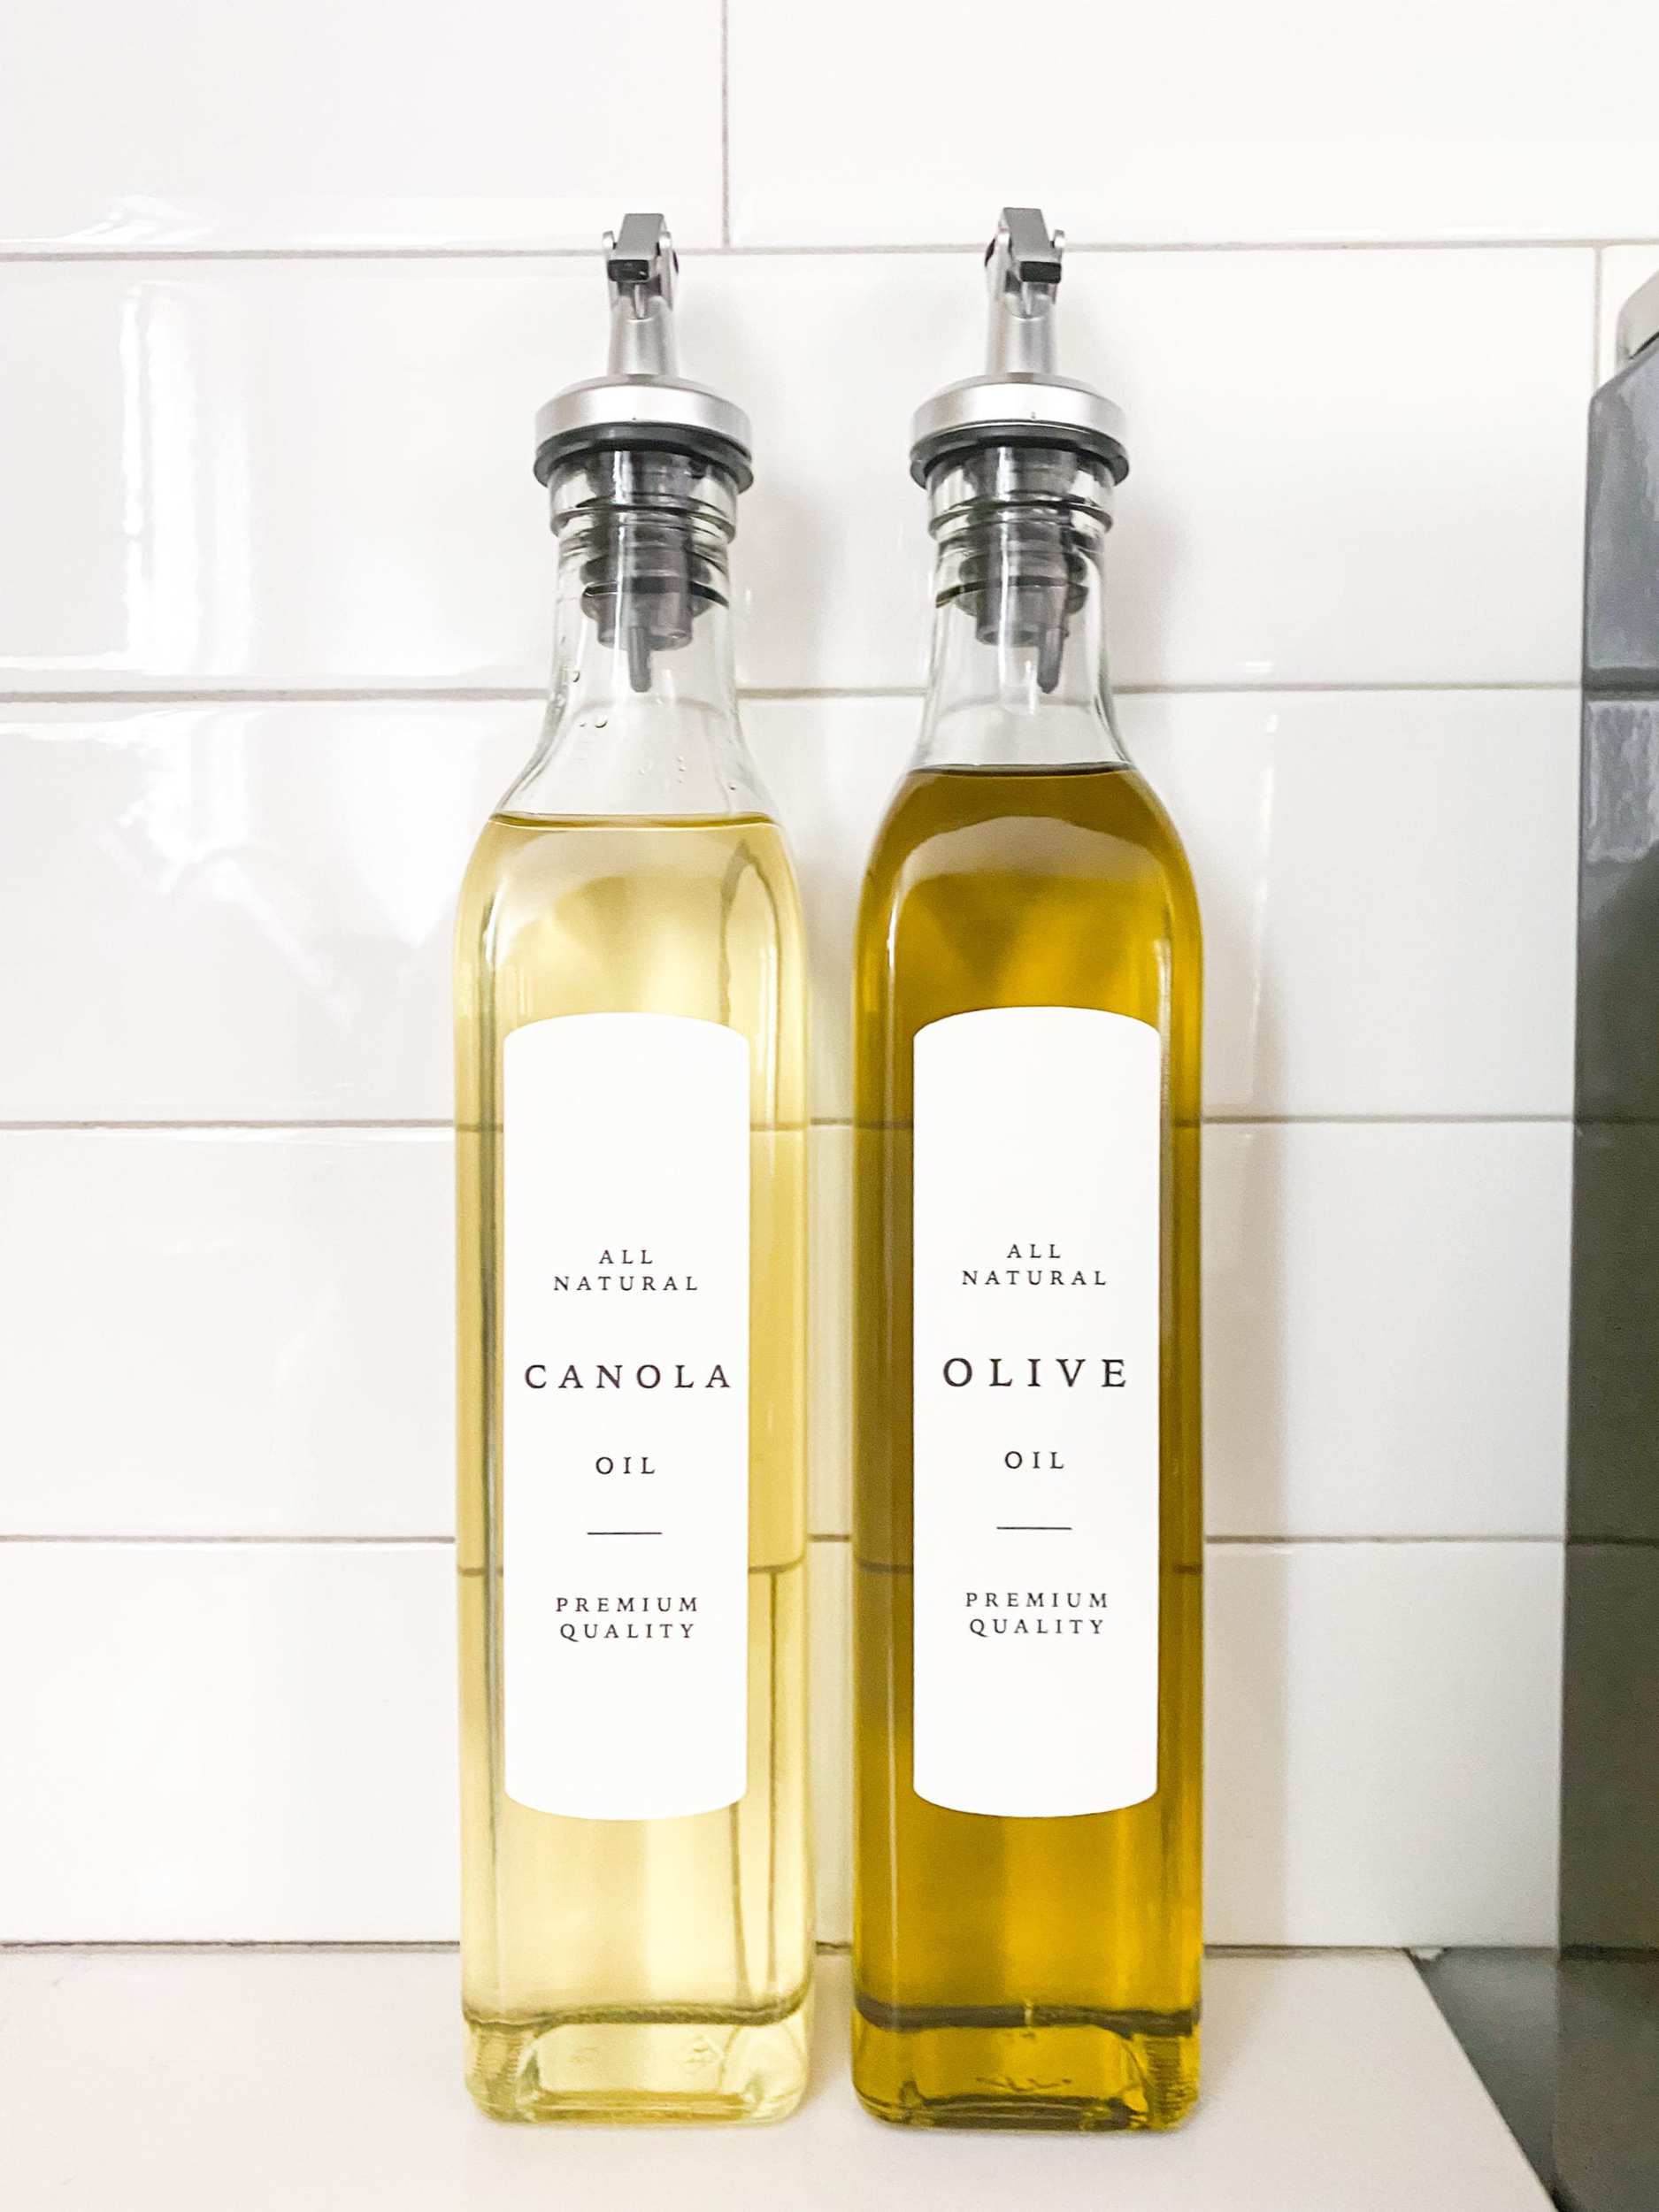 olive oil and canola oil labels and dispensers